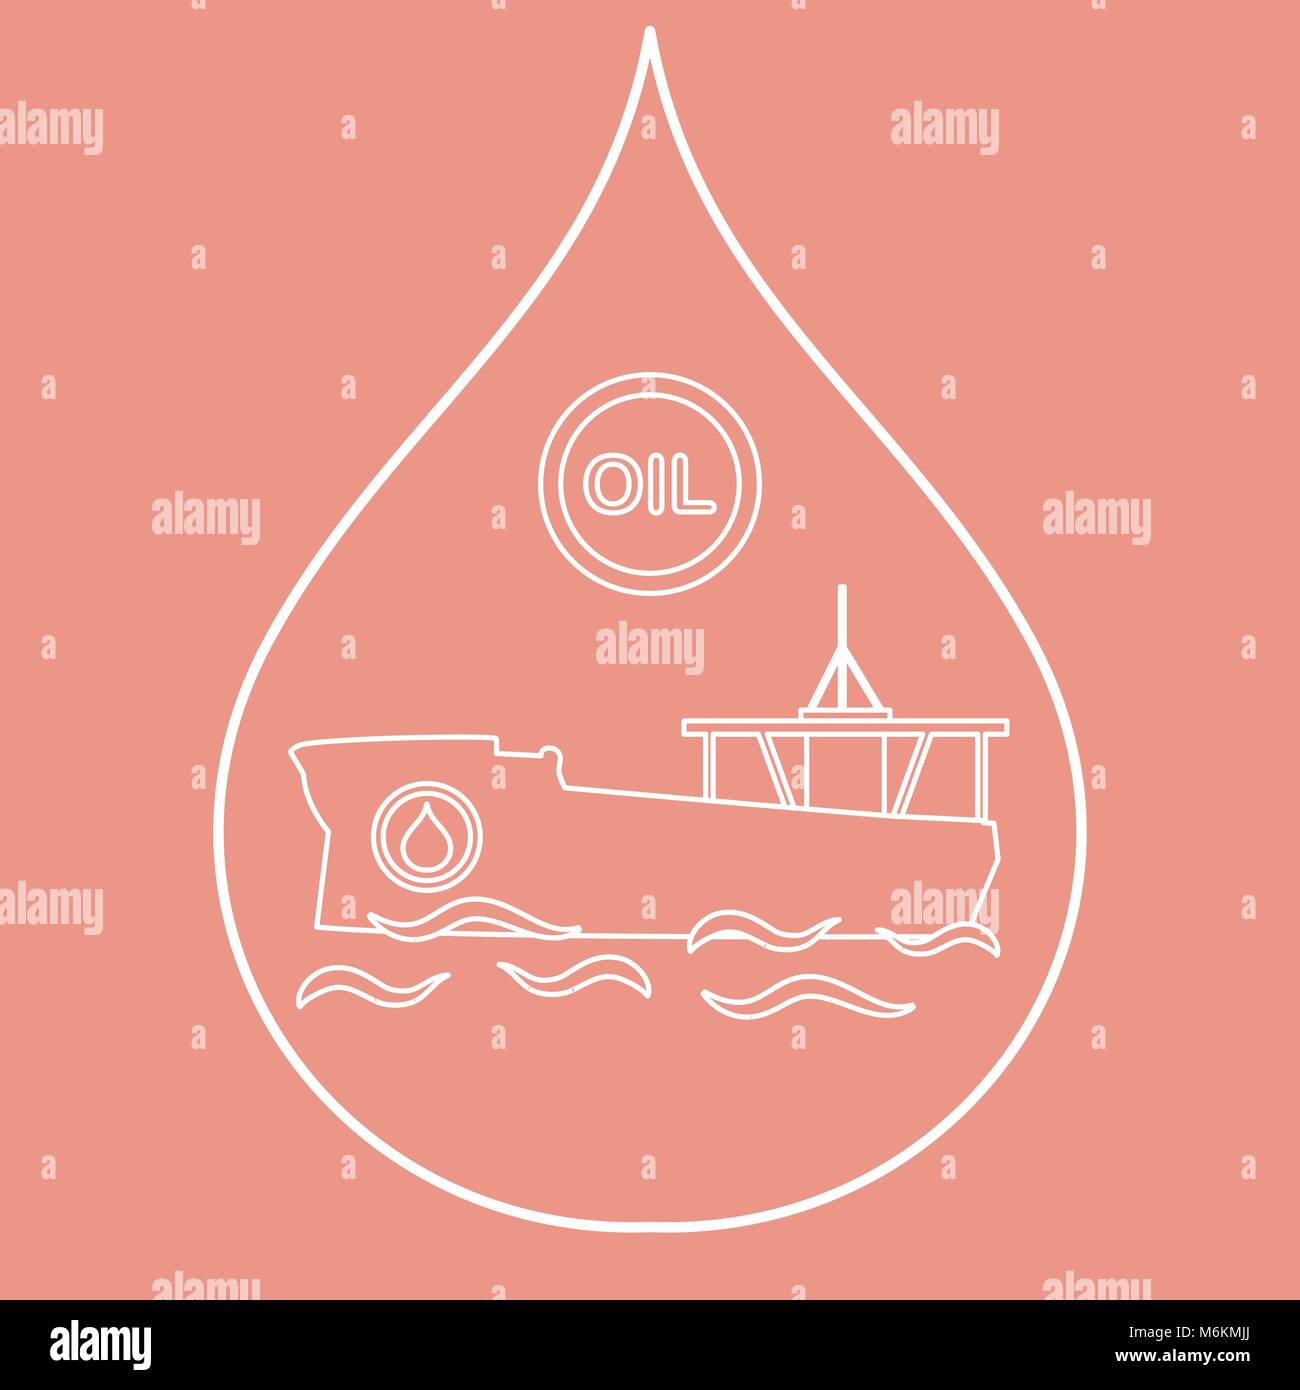 Drop inside which a tanker carrying oil. Production and transportation of oil. Stock Vector